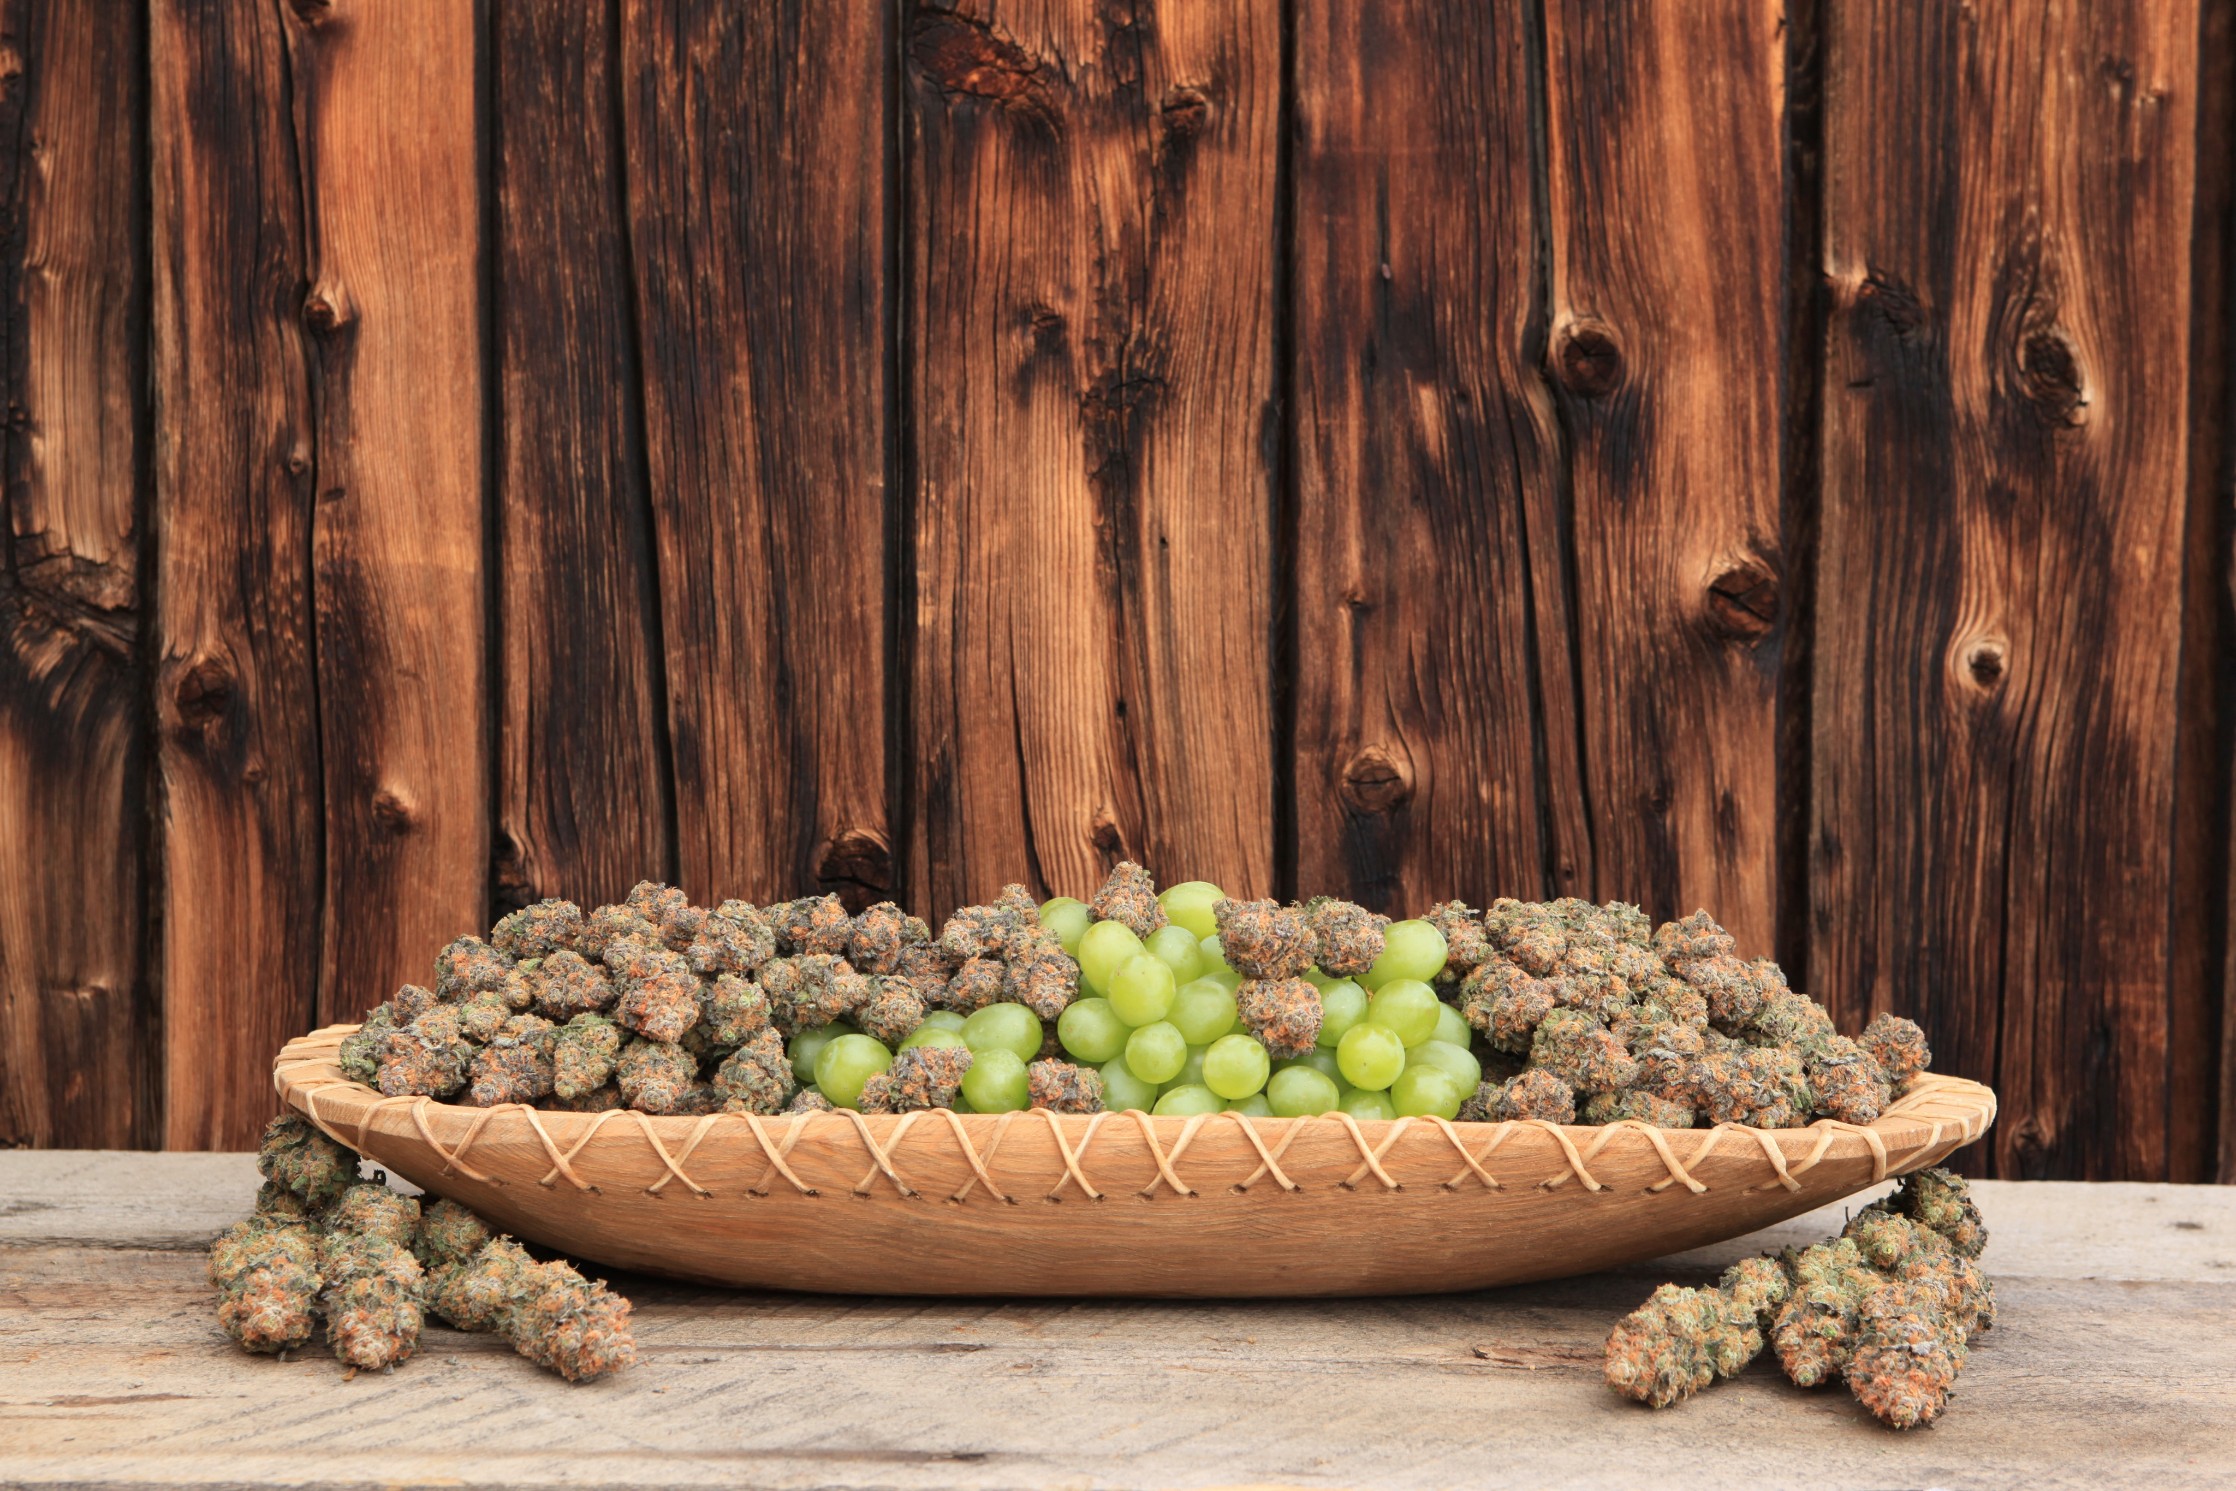 Grapes and cannabis buds on sale at High Country Healing